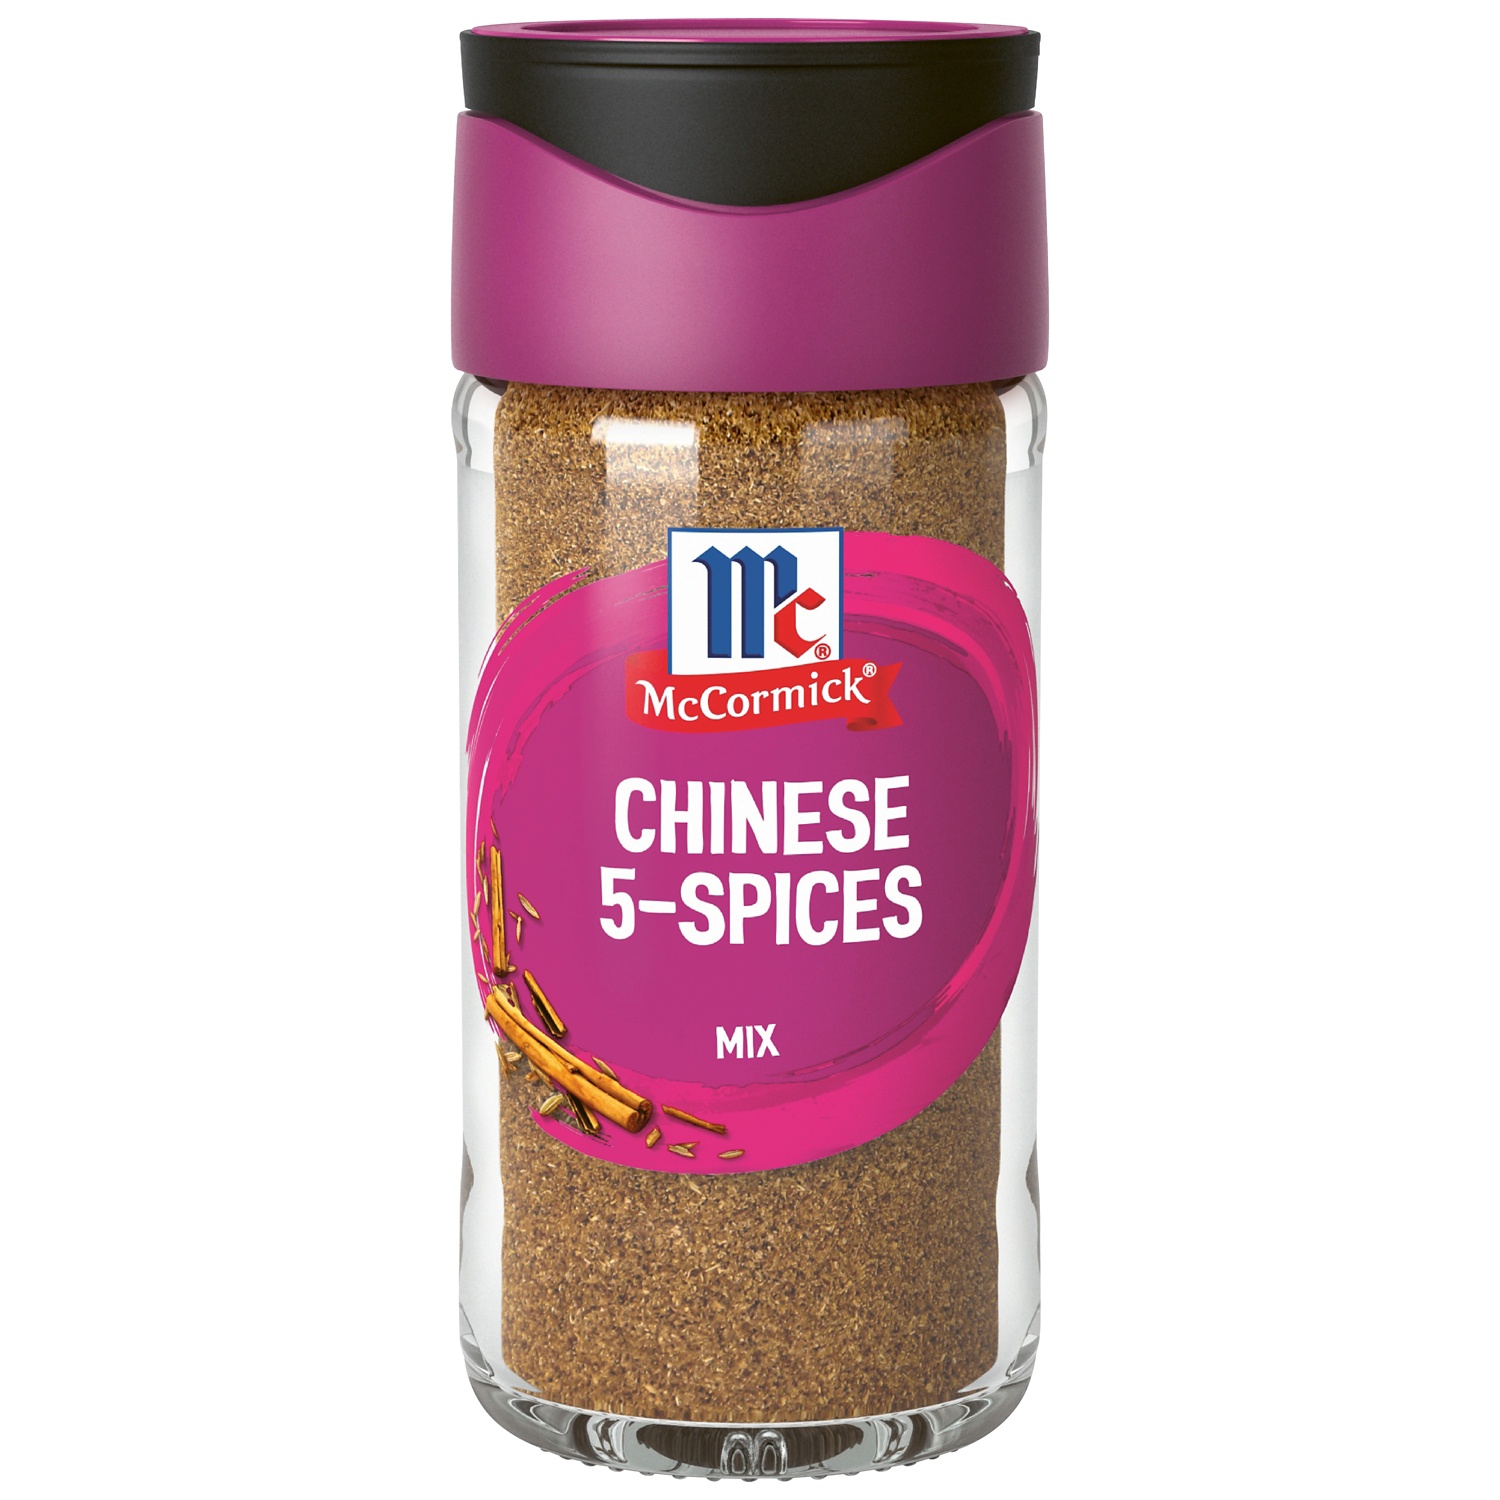 MC CORMICK Spezie Asia, Chinese 5-Spice